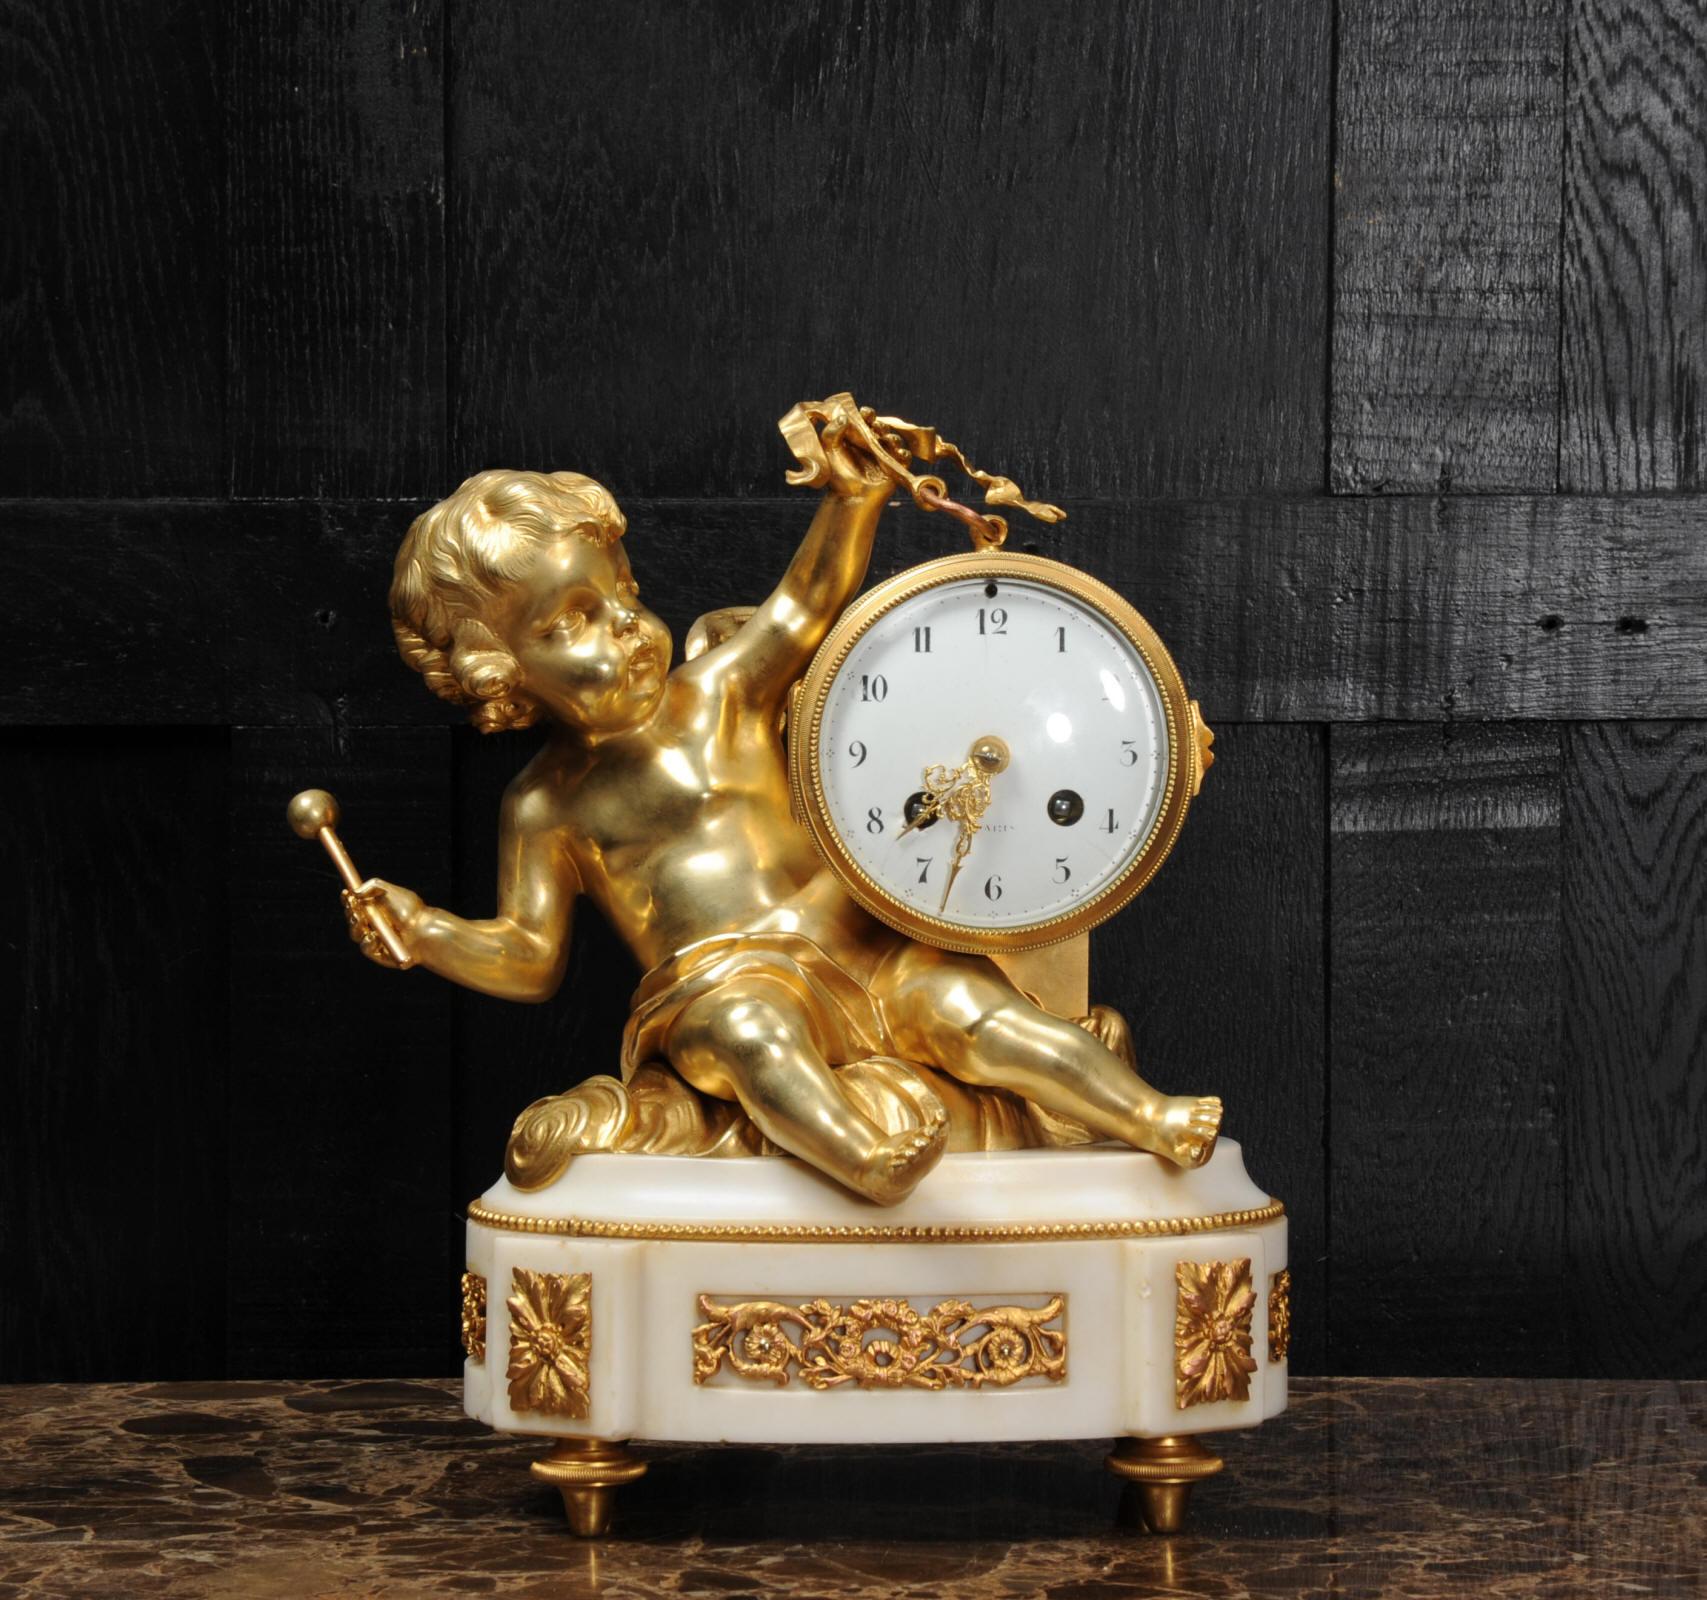 A superb original antique French clock, circa 1880. It is finely modelled in the Rococo manner with a putti floating in the clouds holding the clock modelled as a drum by a ribbon. In the other hand he is about to beat the drum. Beautifully made and